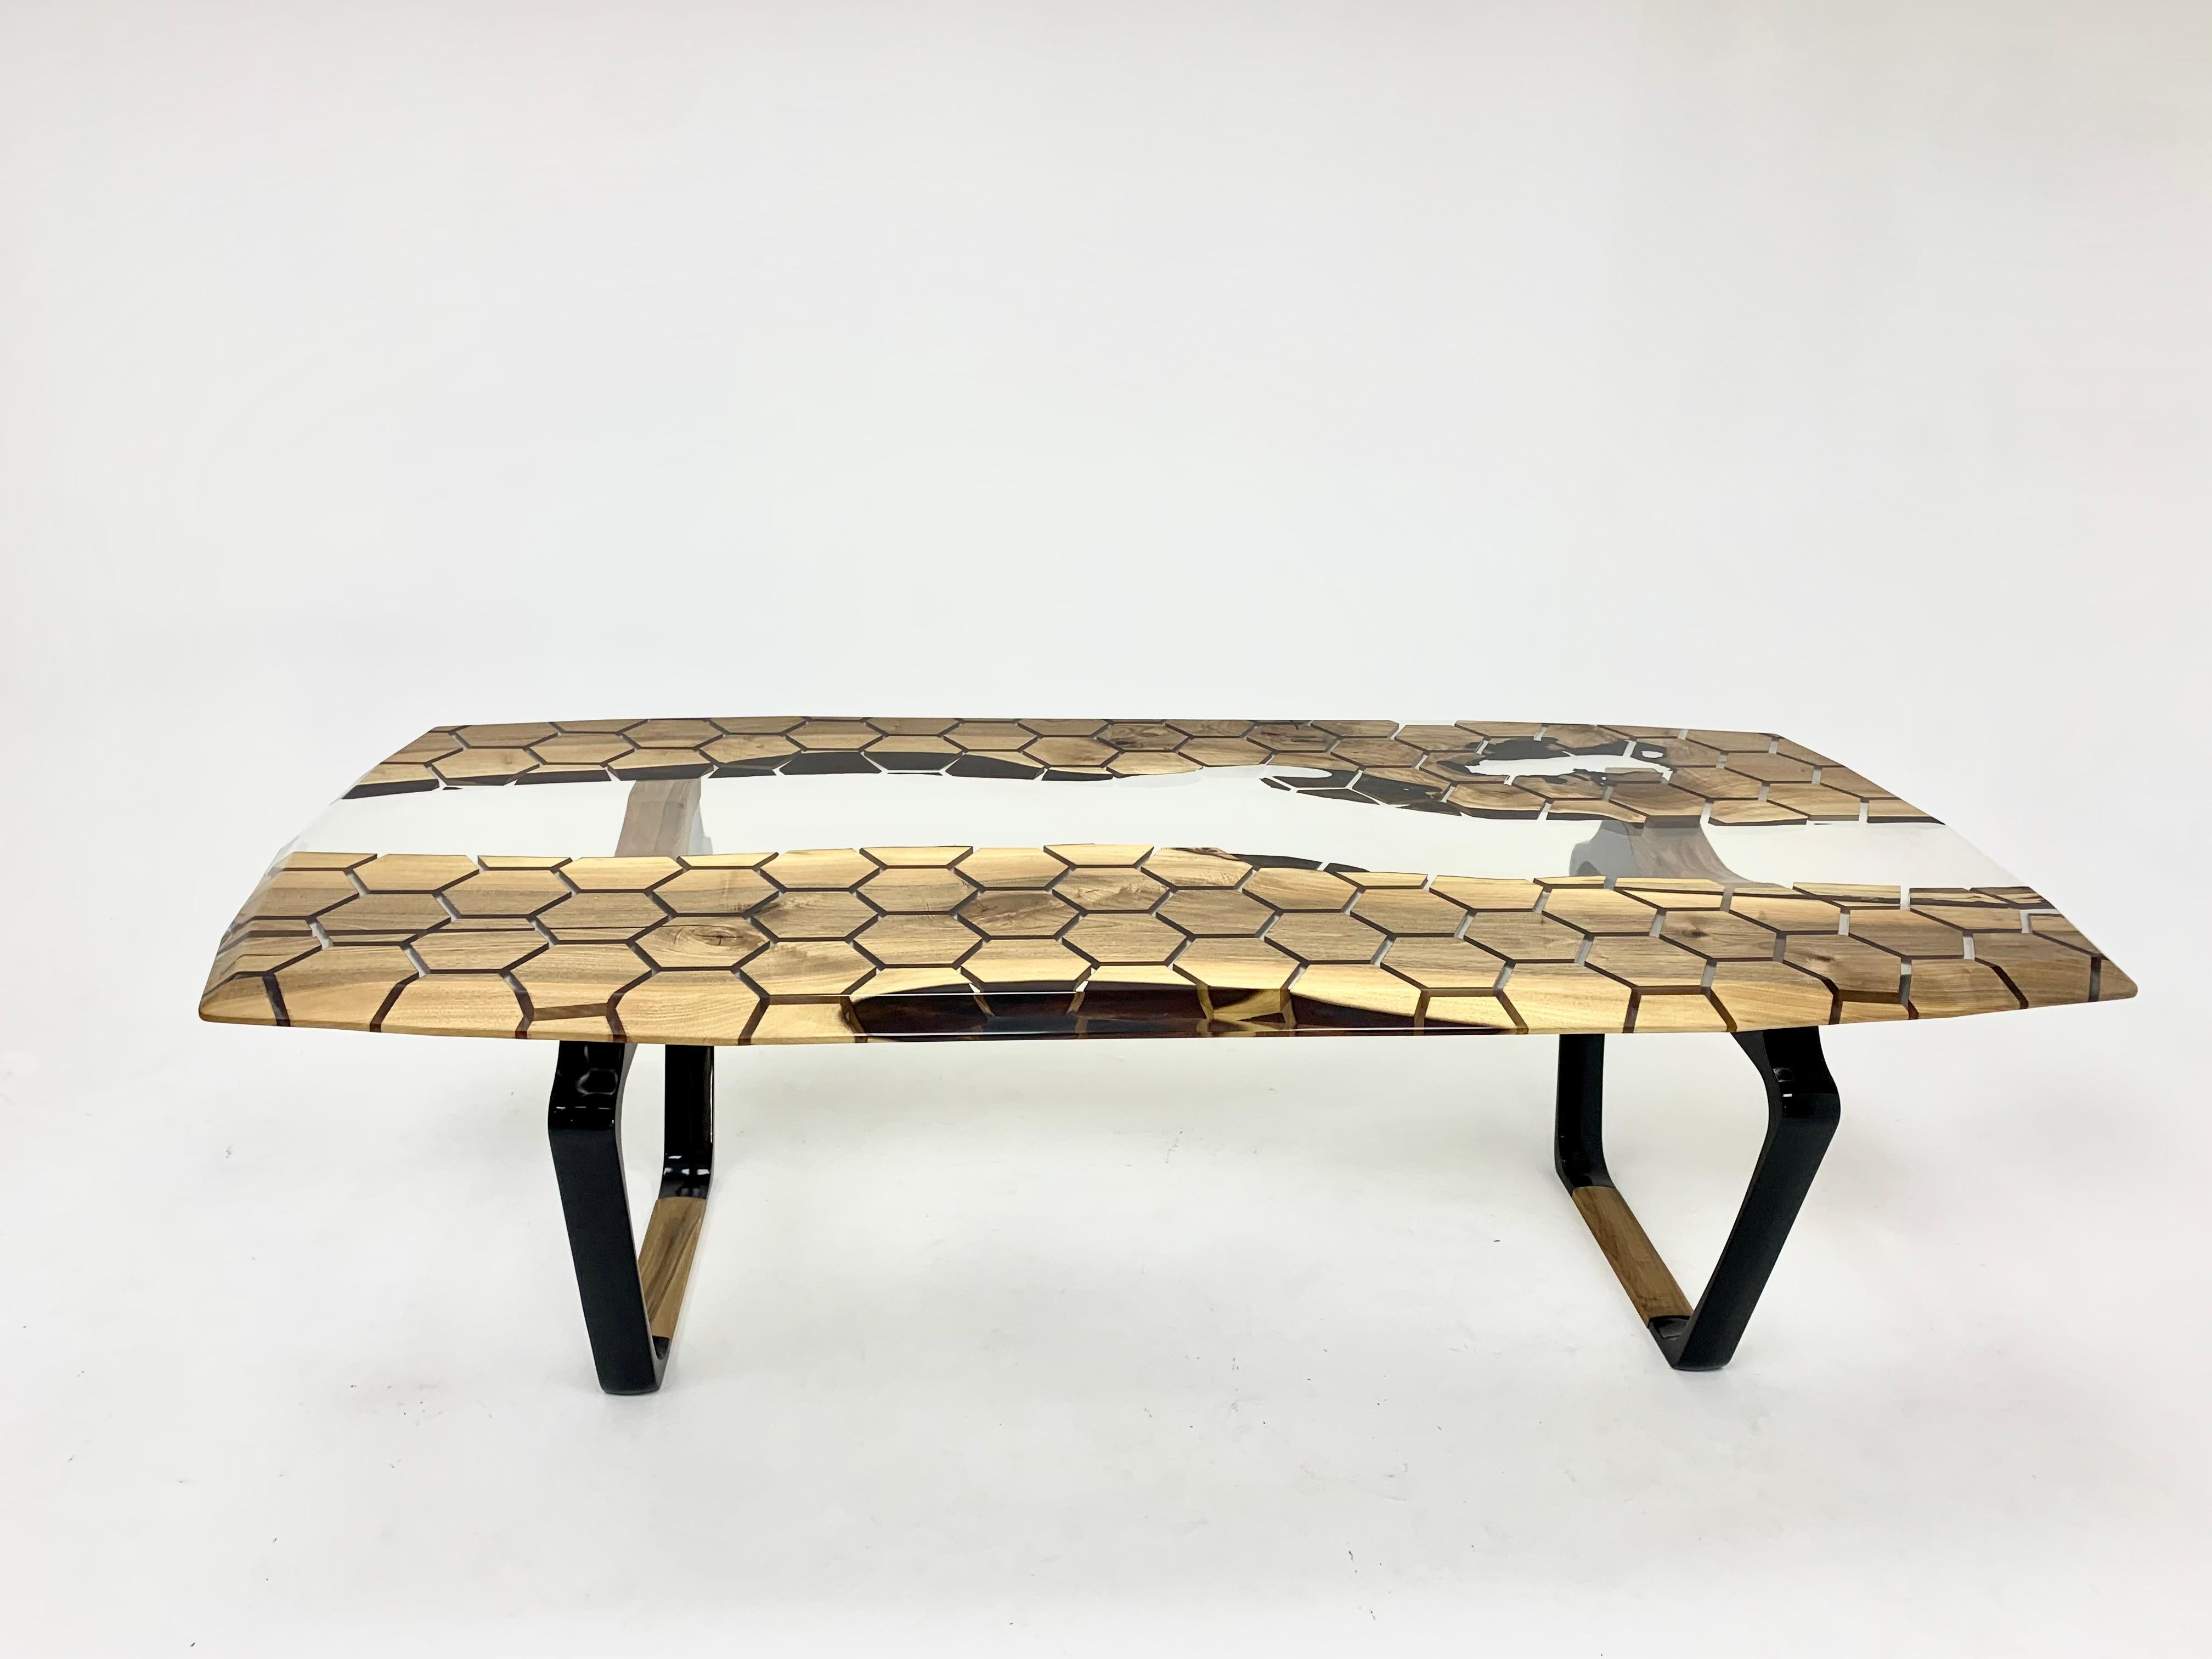 honeycomb resin table